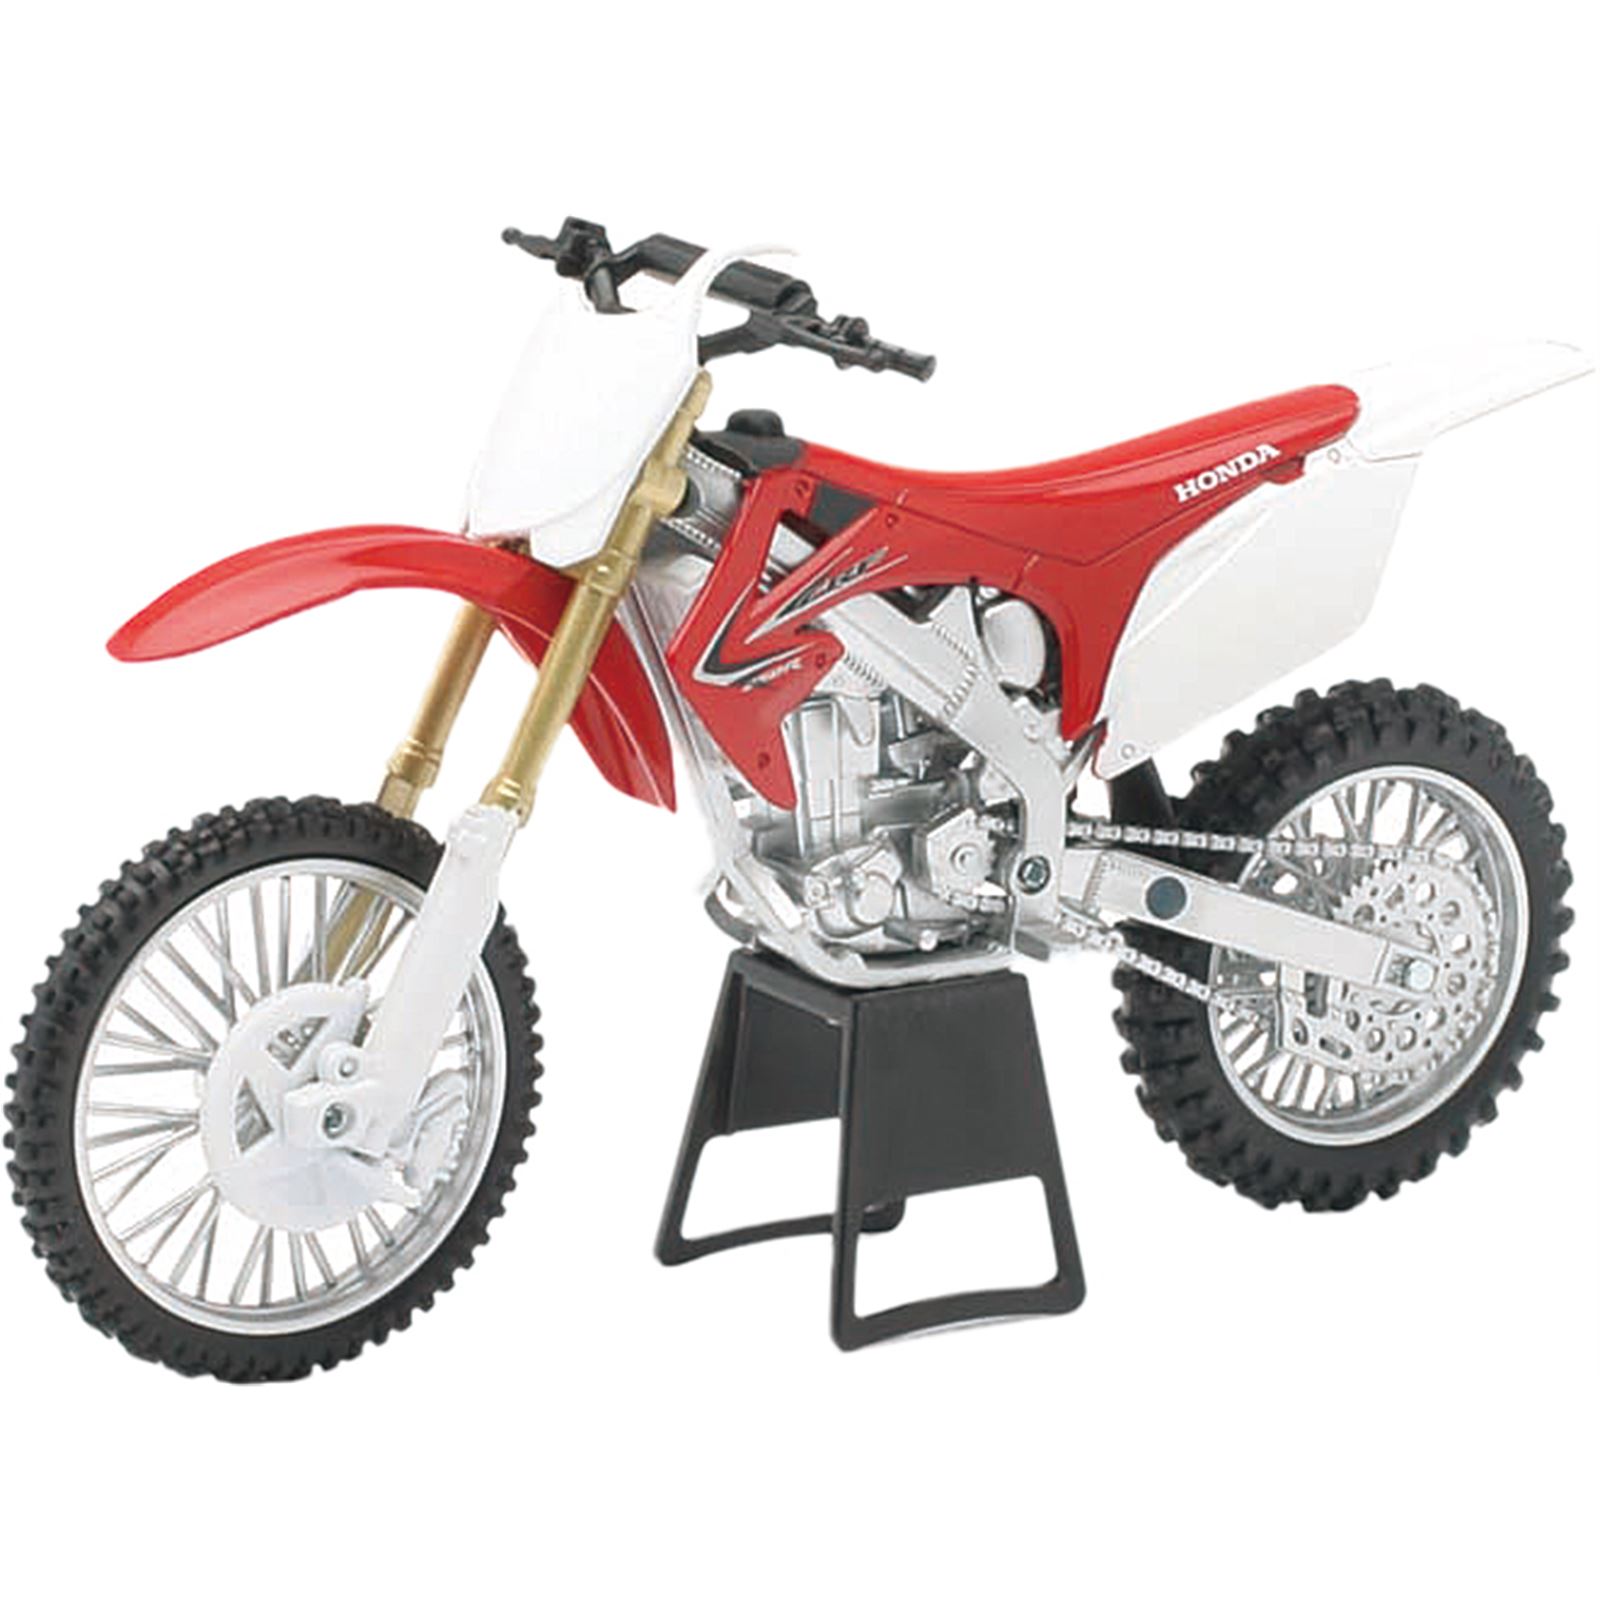 Orange Cycle Parts Die-Cast Replica Toy Red 1:12 Scale Model Honda CRF 450R Dirt Bike by NewRay 57873 New Ray Toys